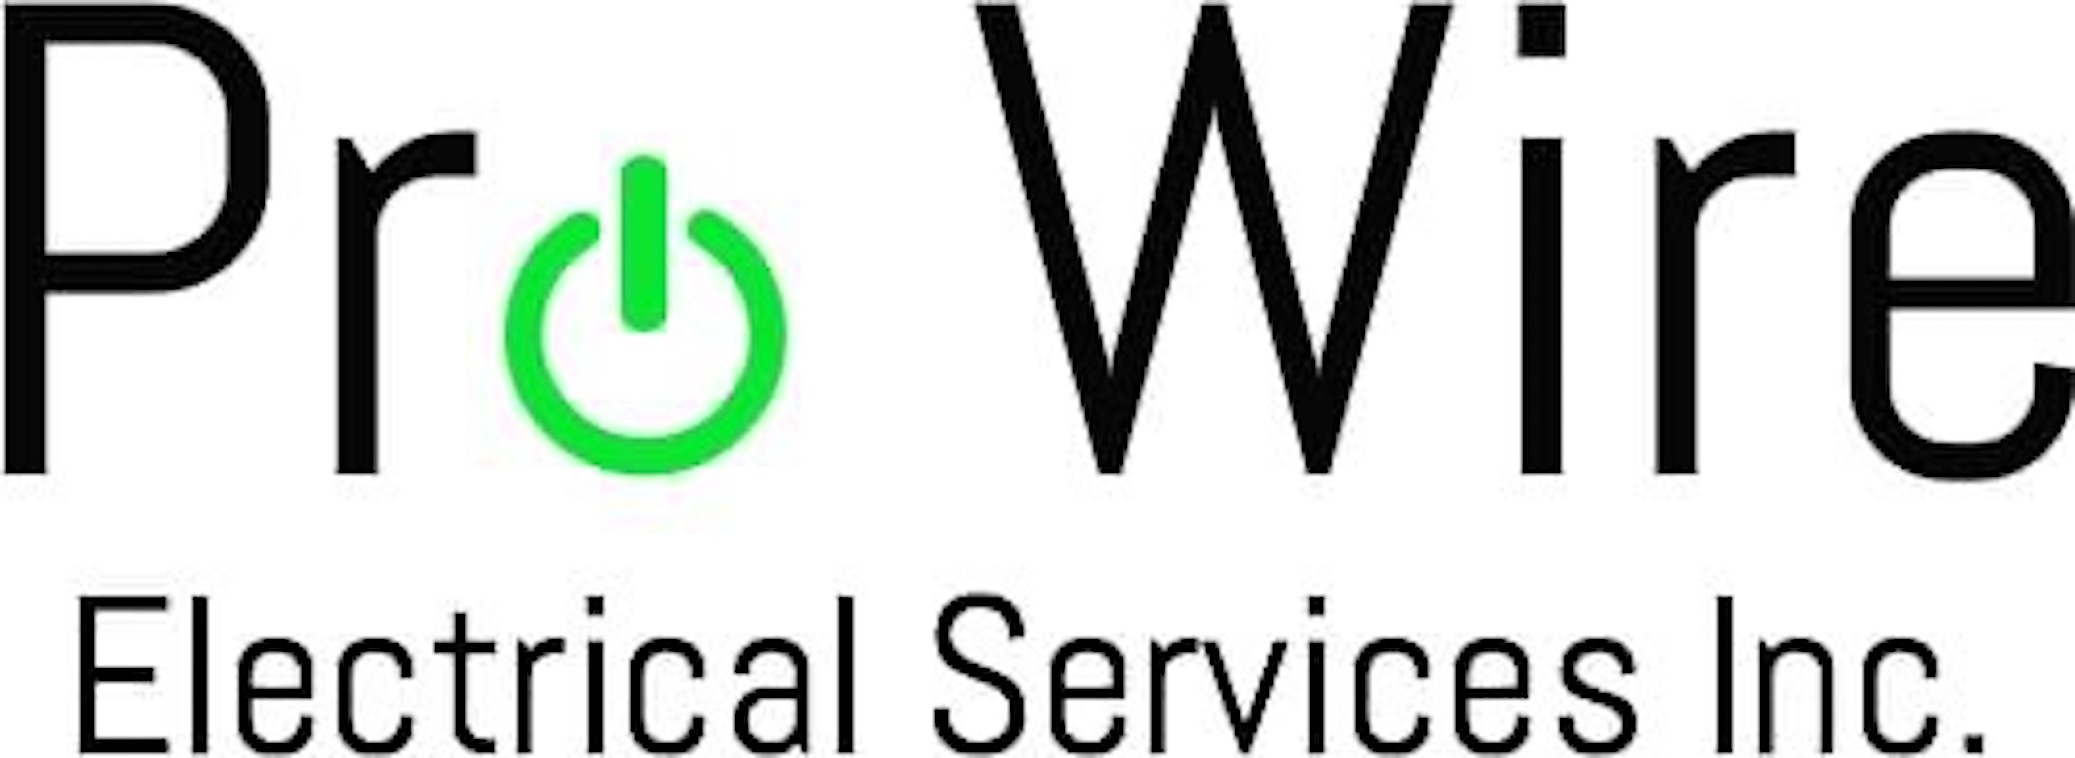 Pro Wire Electrical Services Logo